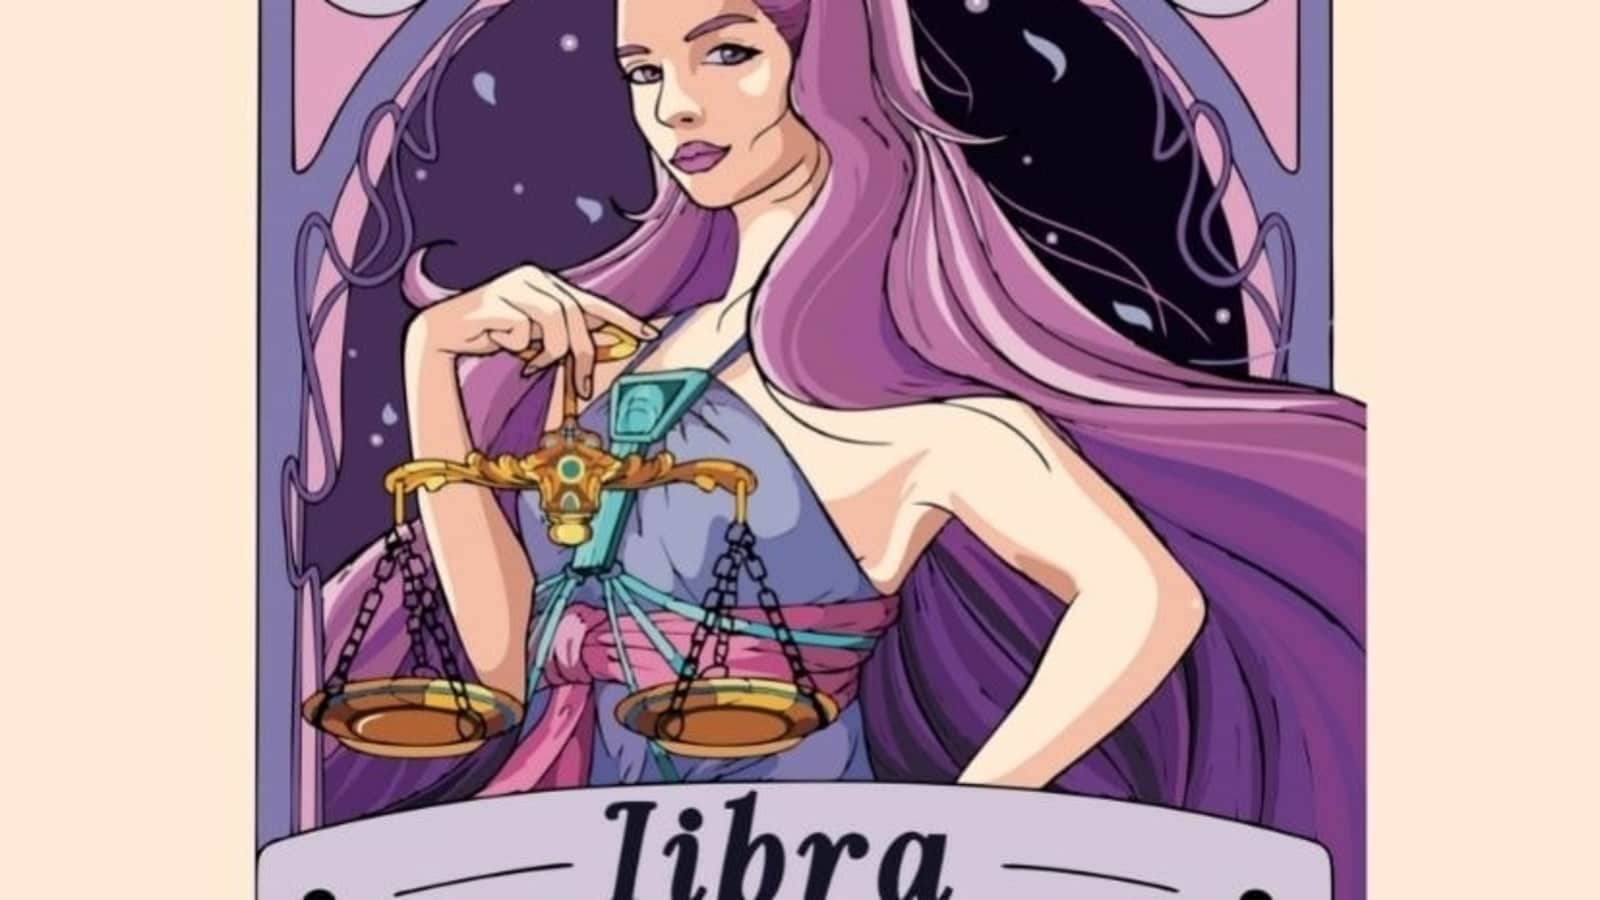 Libra Horoscope Today: Daily Predictions for May 25, 2022 states, work hard